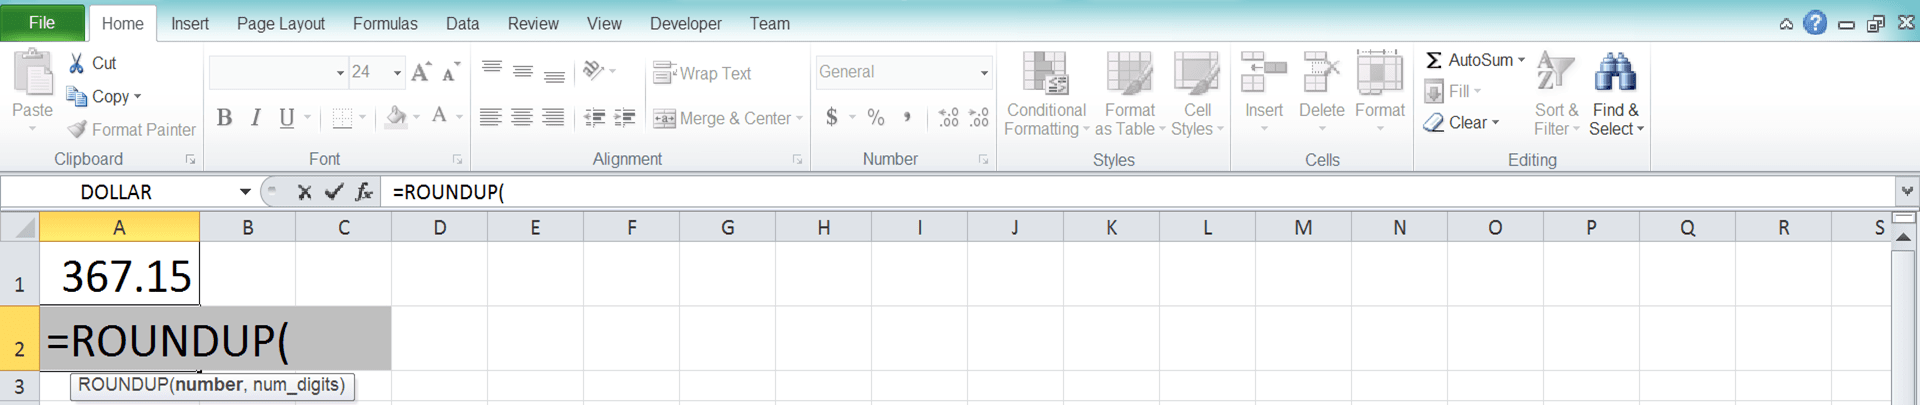 Excel ROUNDUP Formula: Functions, Examples, and How to Use - Screenshot of Step 2